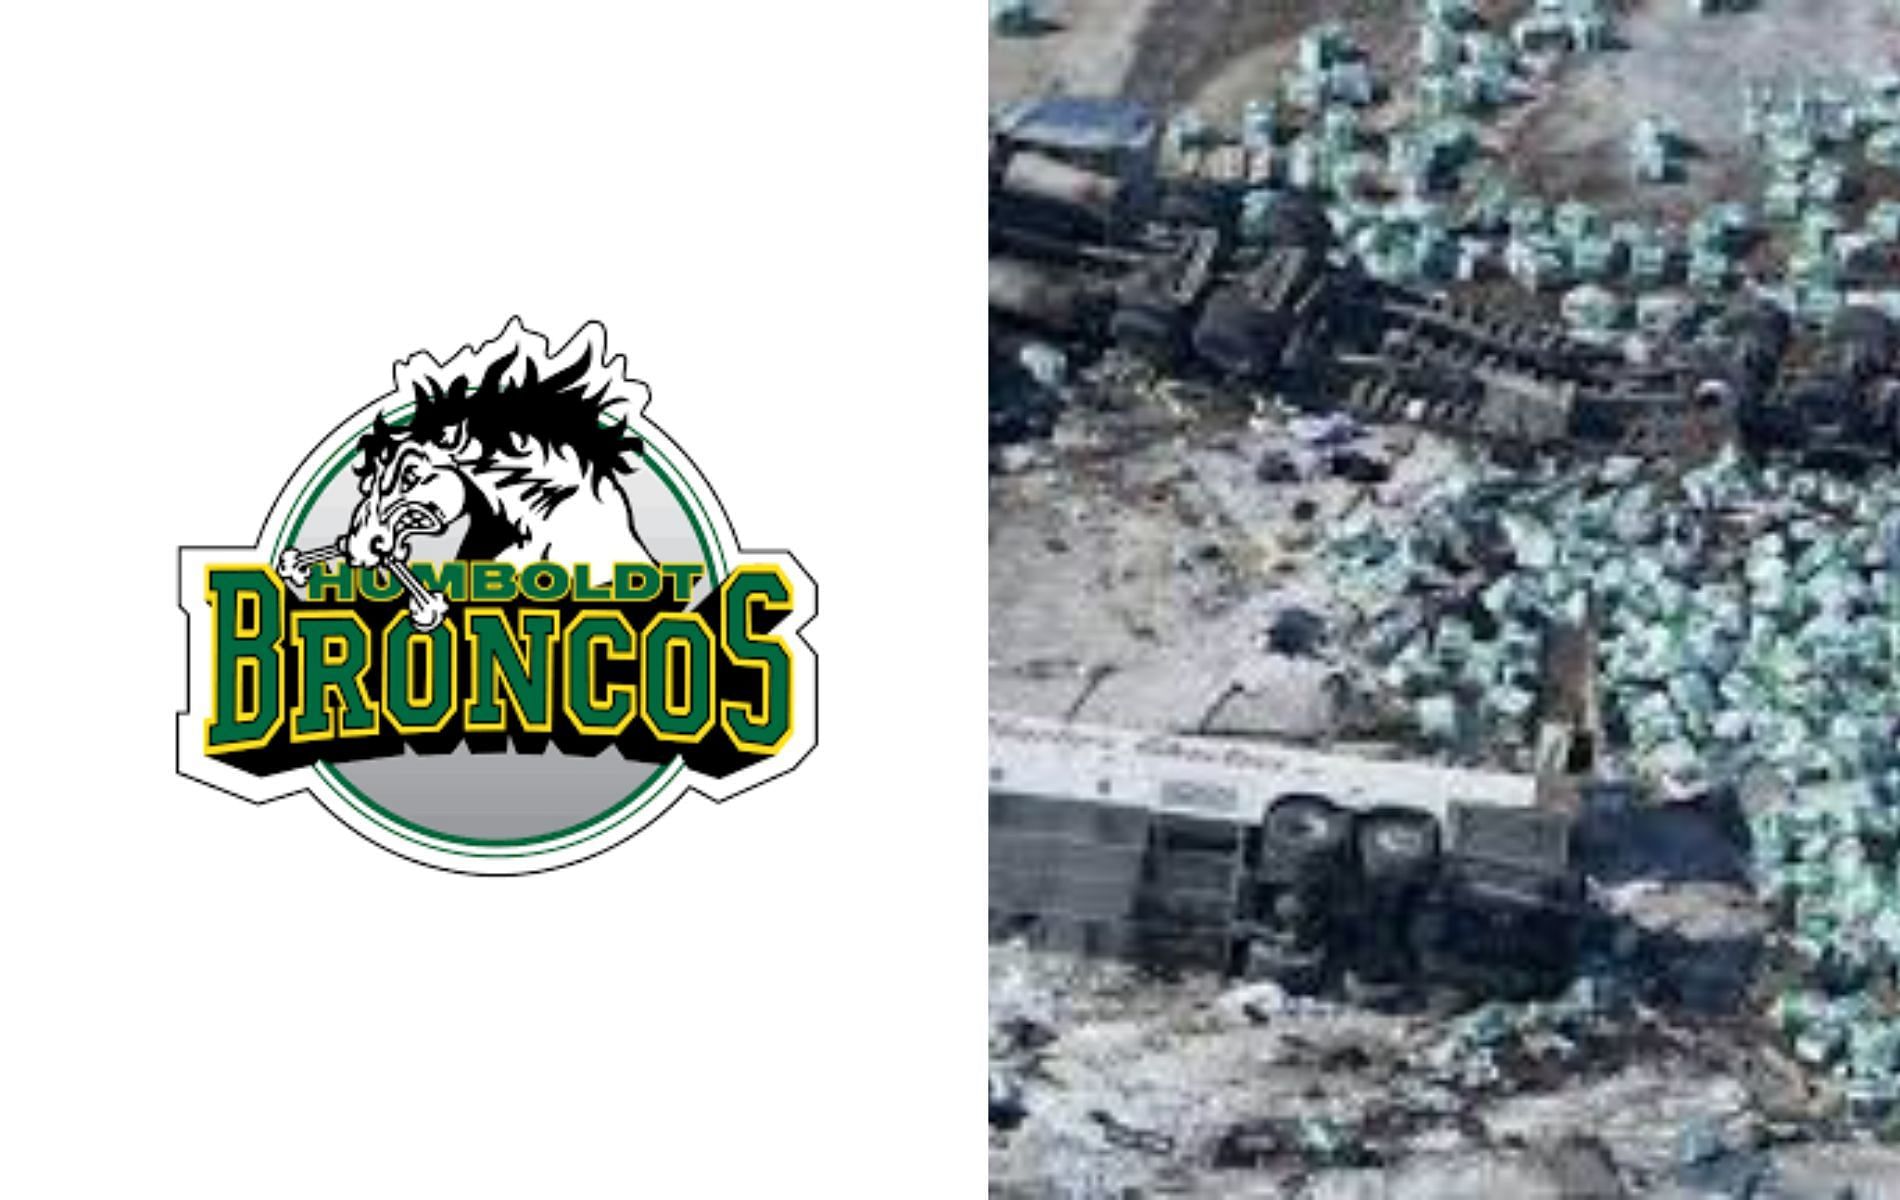 Humboldt Broncos tragedy: What happened, according to the agreed statement  of facts